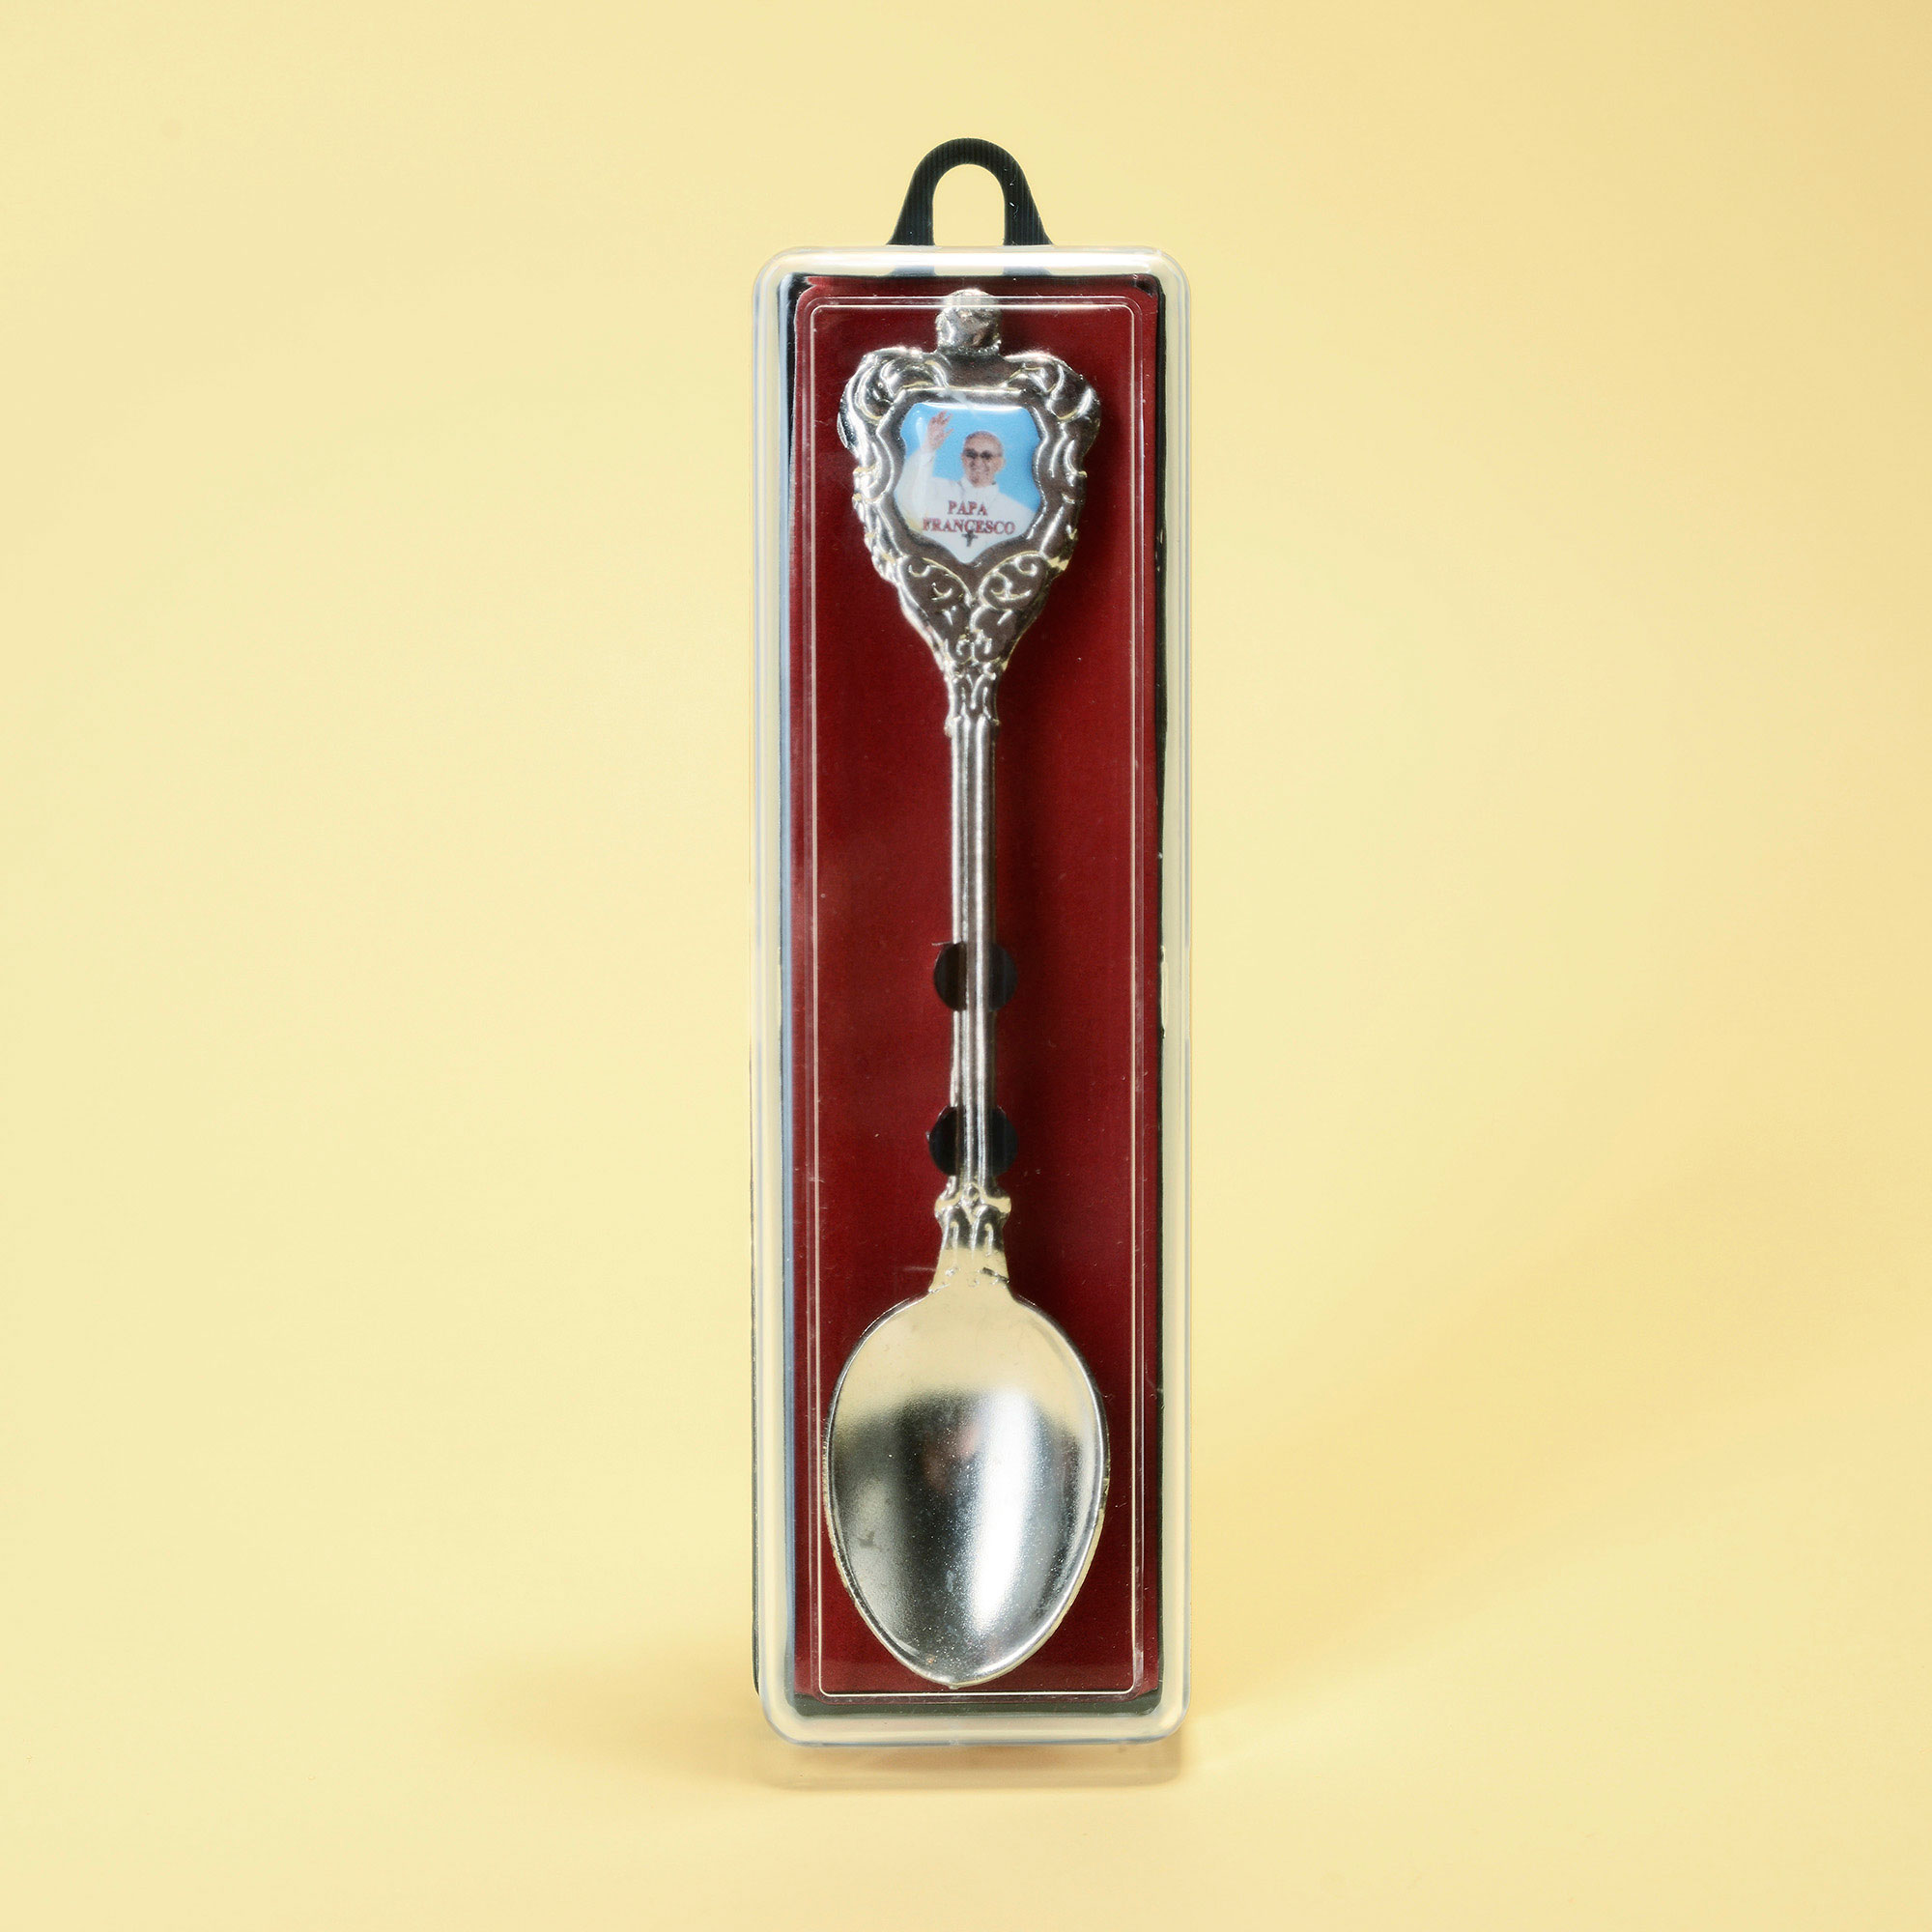 Metal spoon with little photograph of Pope Francis in plastic box.

Price :  4,90 €